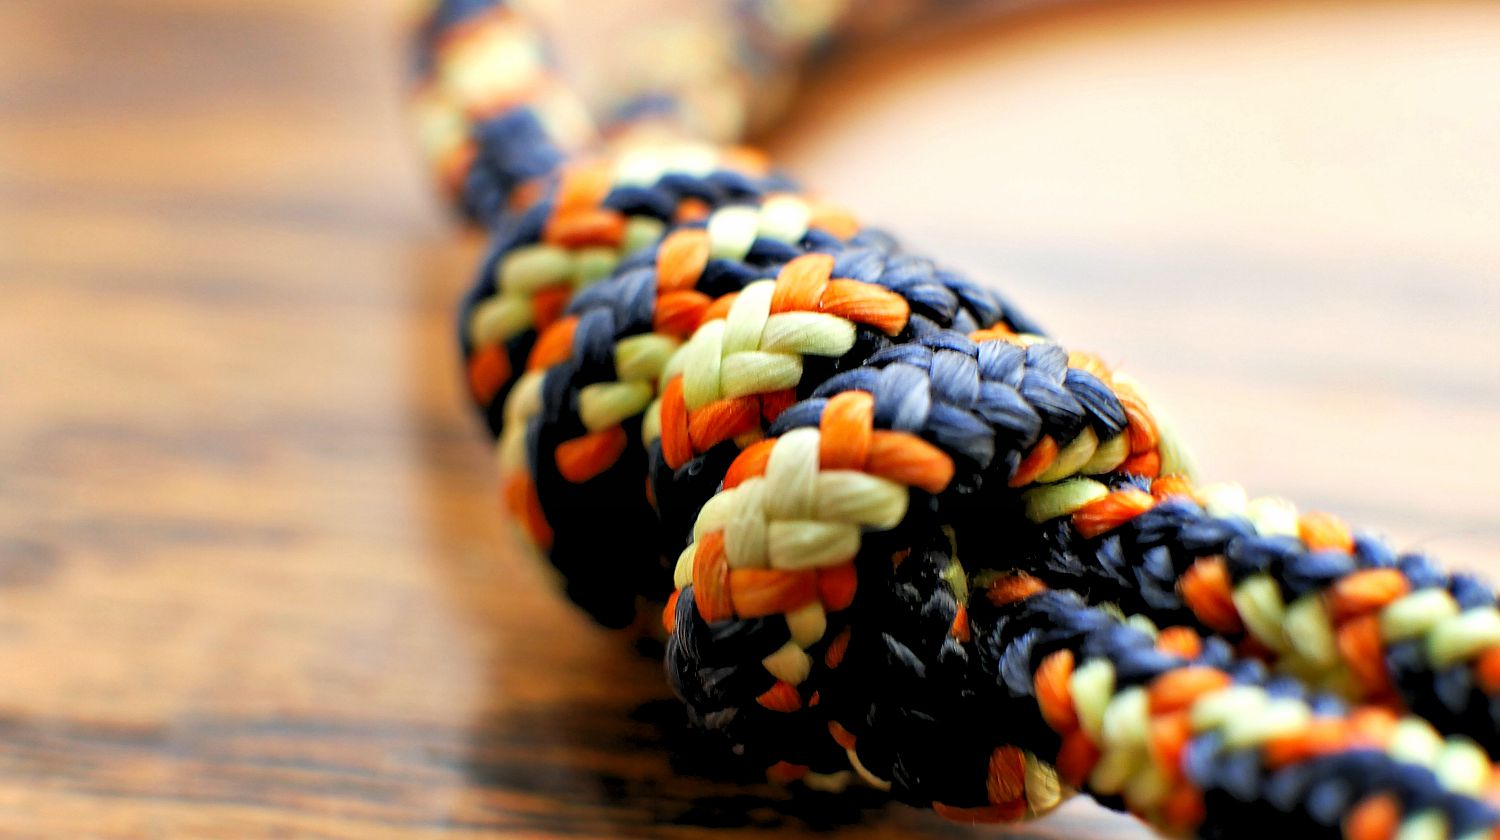 Featured | Braided nylon rope on wood grain | Best Knots For Camping And Survival